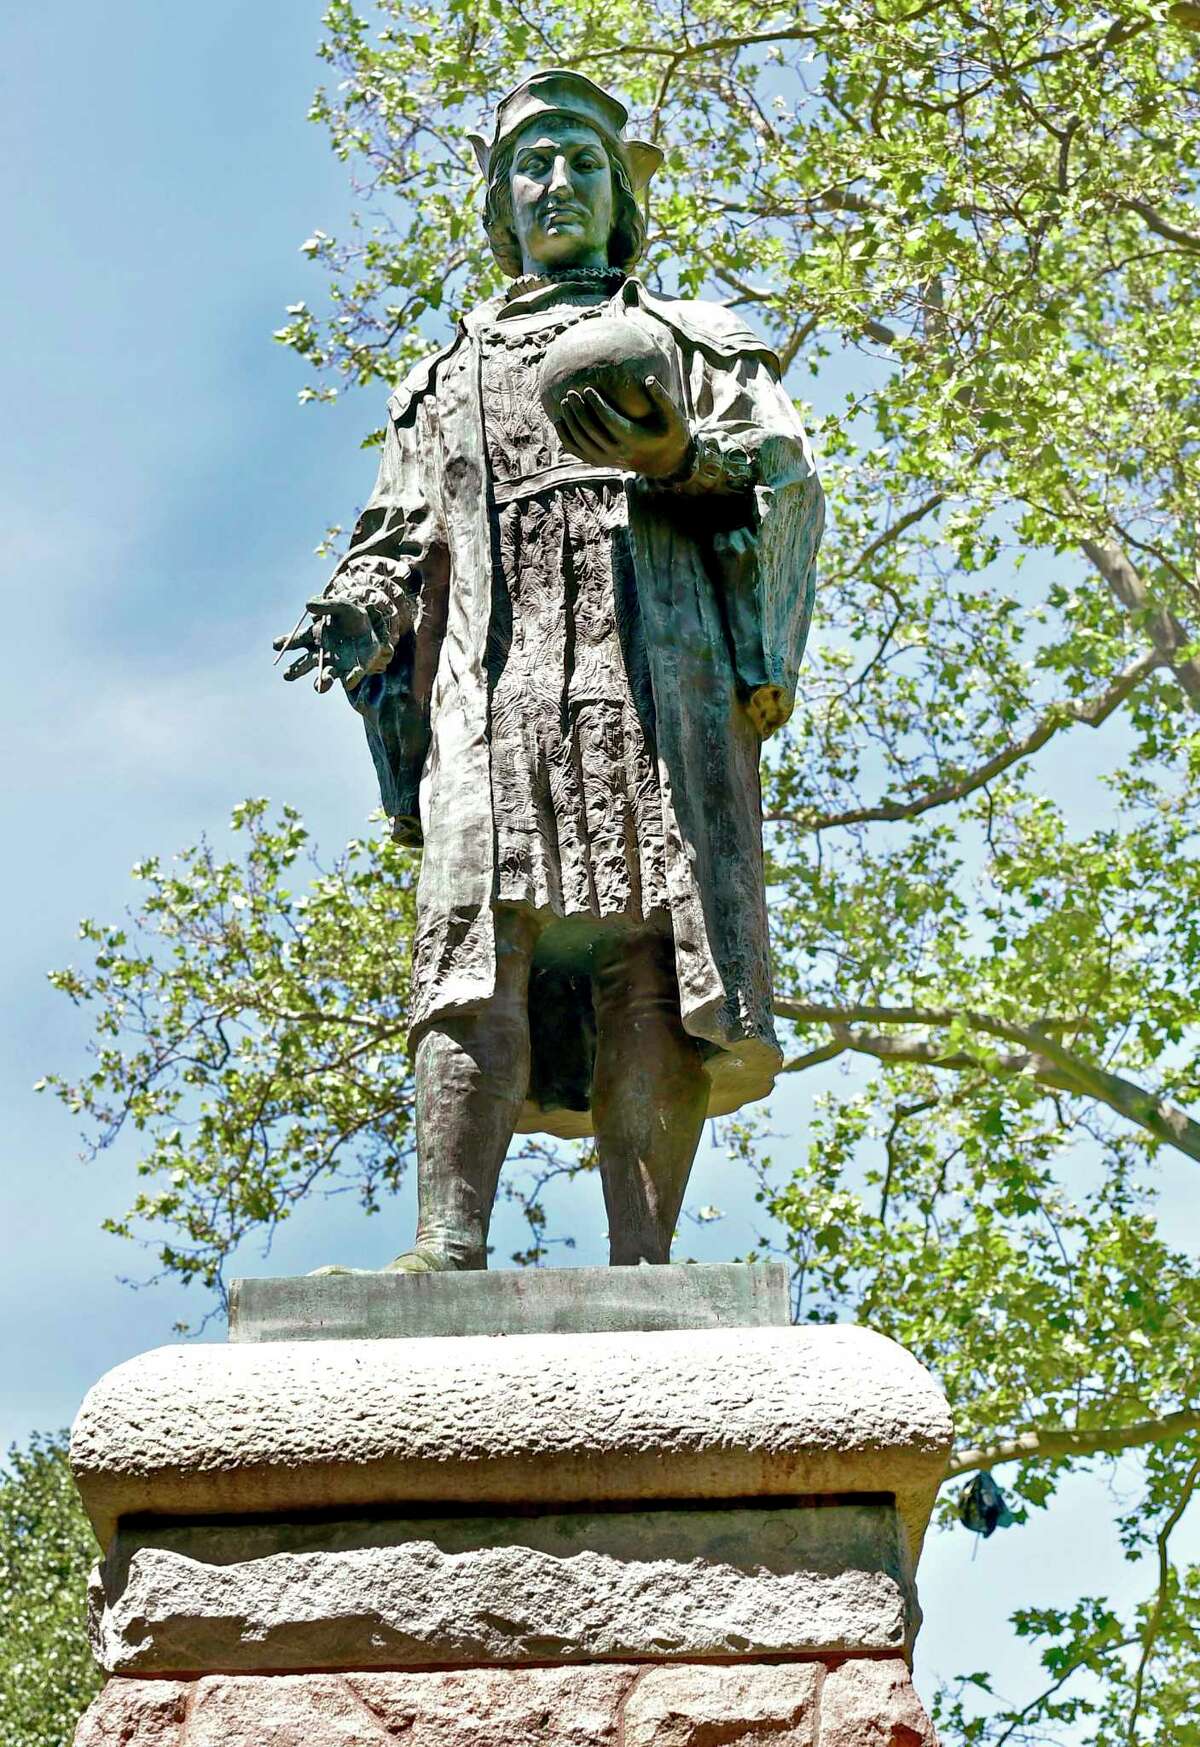 The statue of Christopher Columbus at Wooster Square Park in New Haven on June 19, 2020.